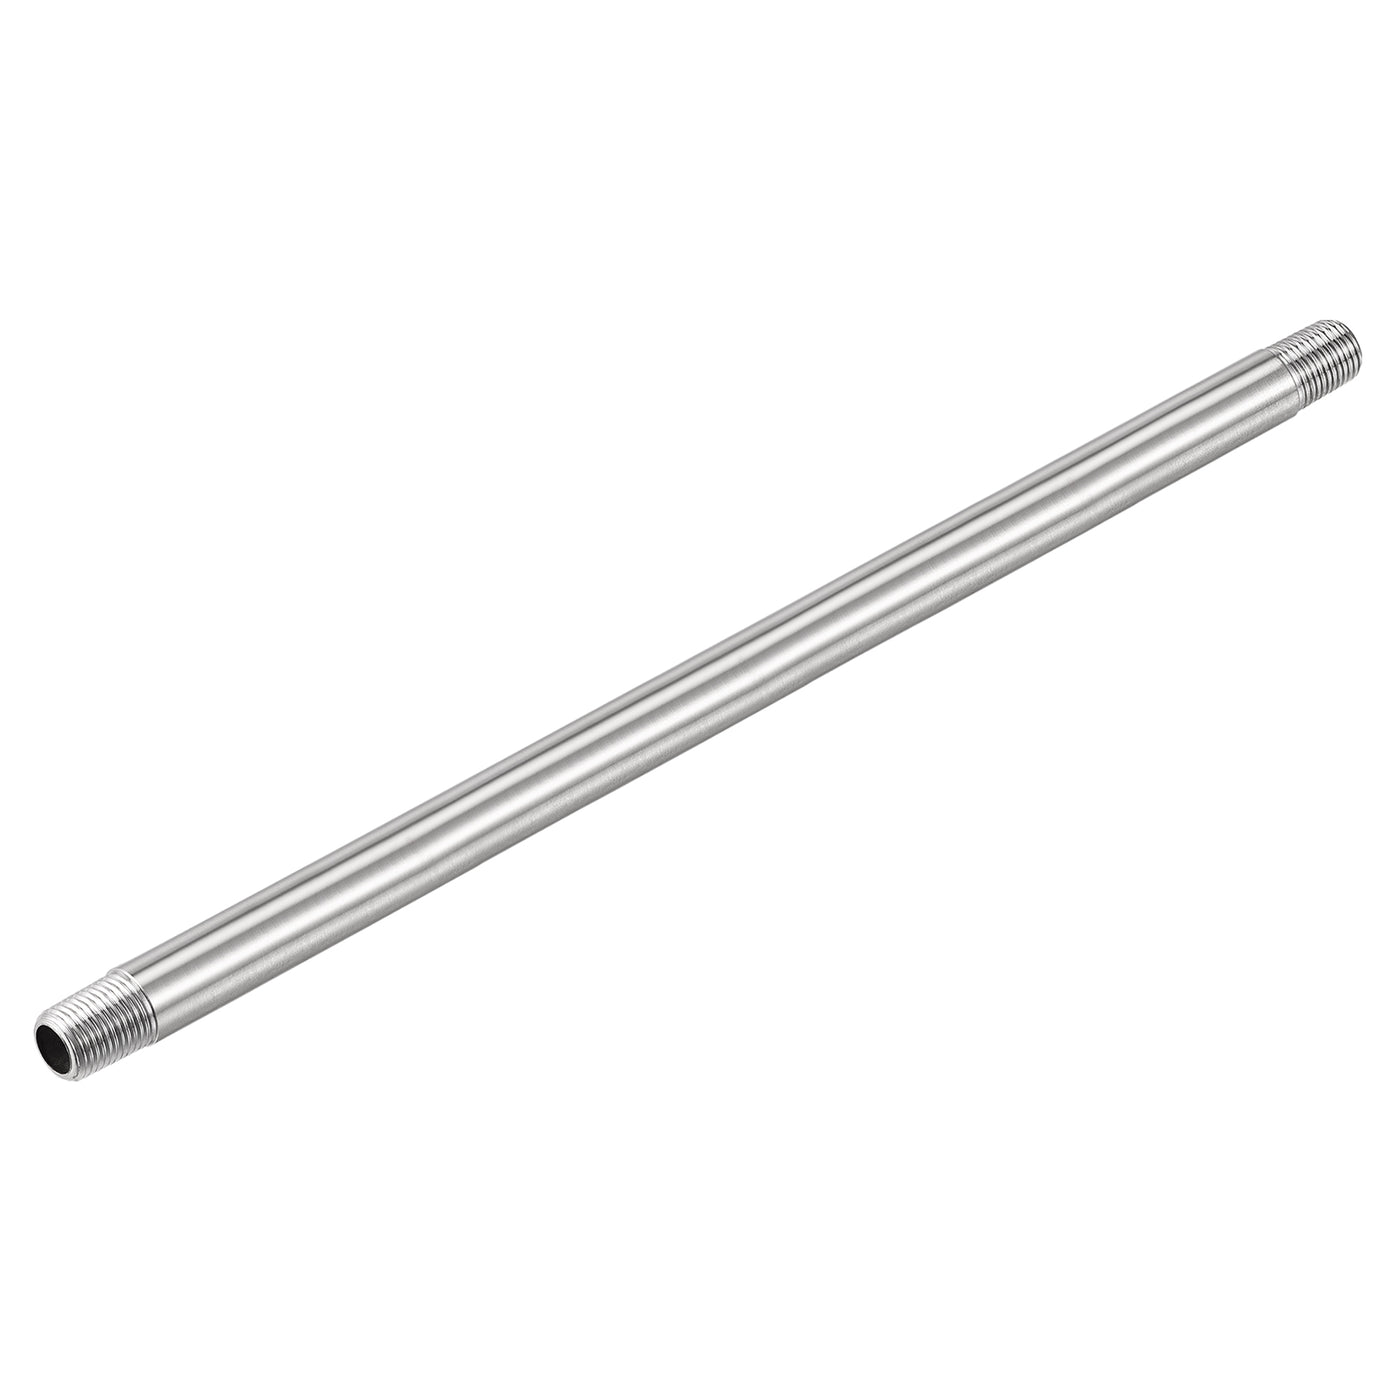 Uxcell Uxcell 304 Stainless Steel Pipe Fitting G1/8 Male Thread 200mm Length Coupler for Extending Pipes